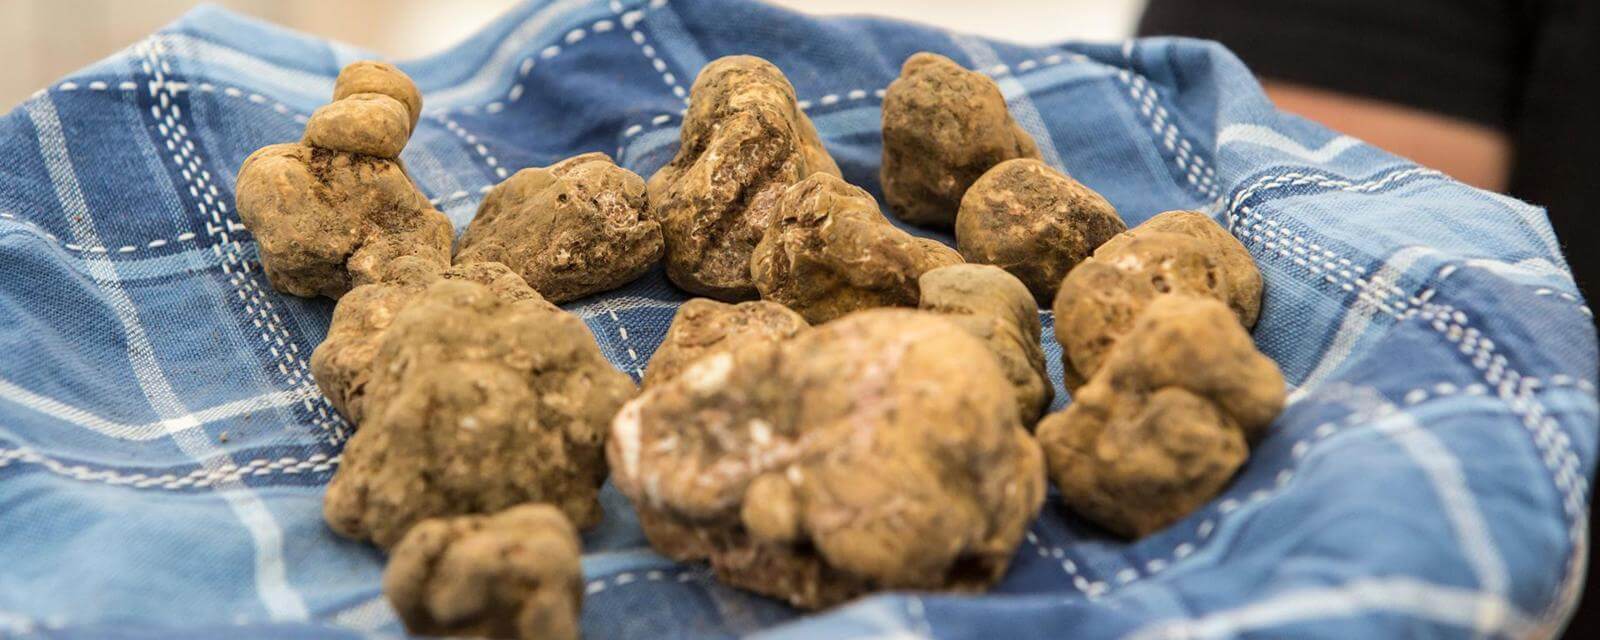 The truth about Italy's white truffles